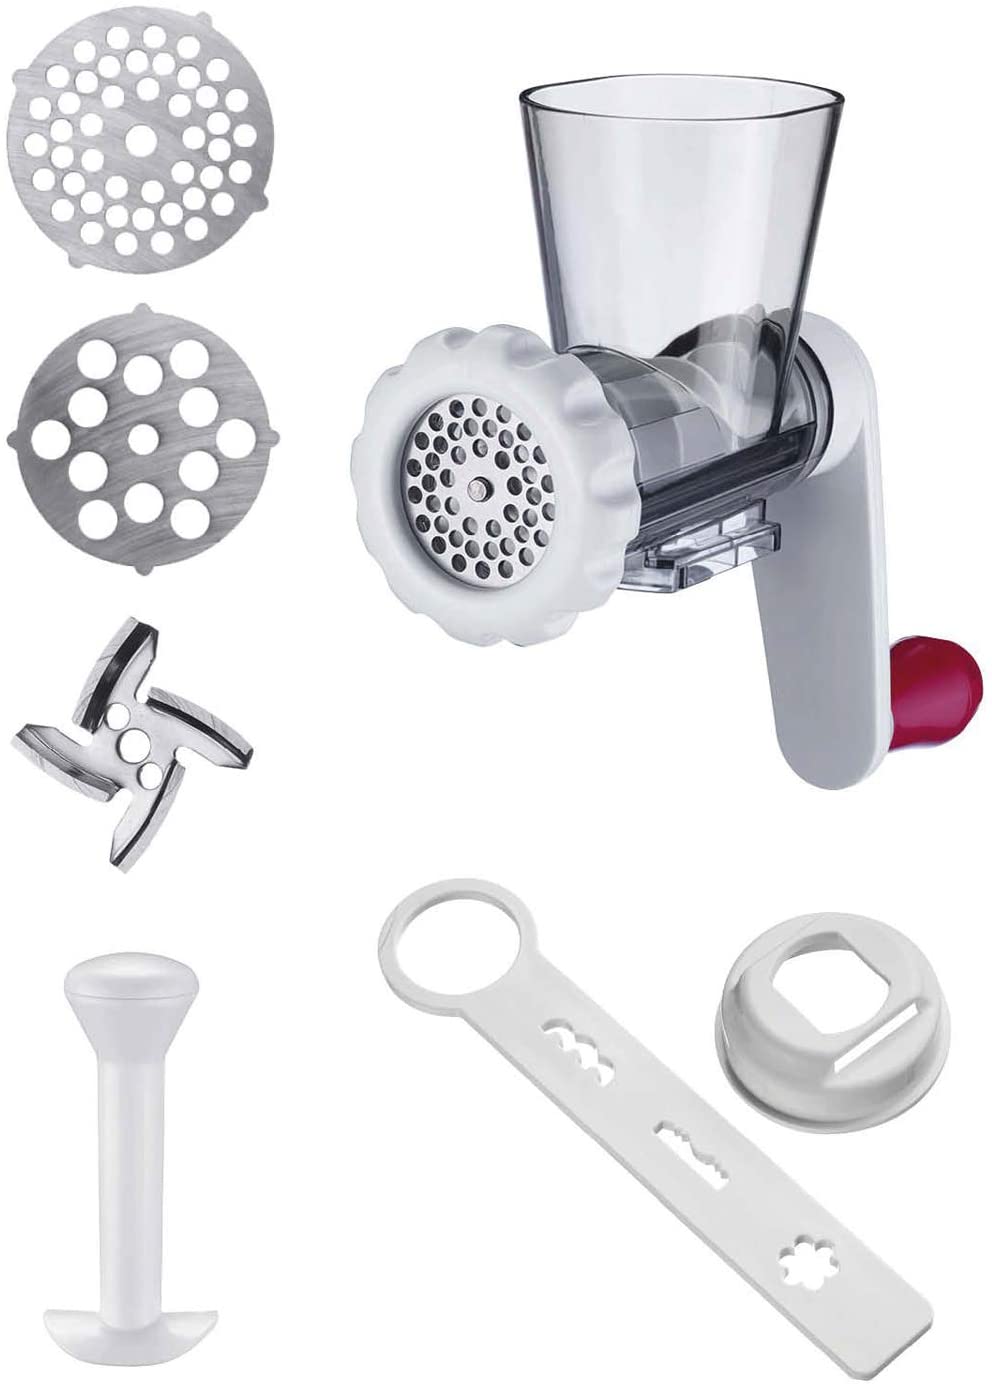 Westmark Meat grinder attachment with 2 perforated discs and biscuit attach